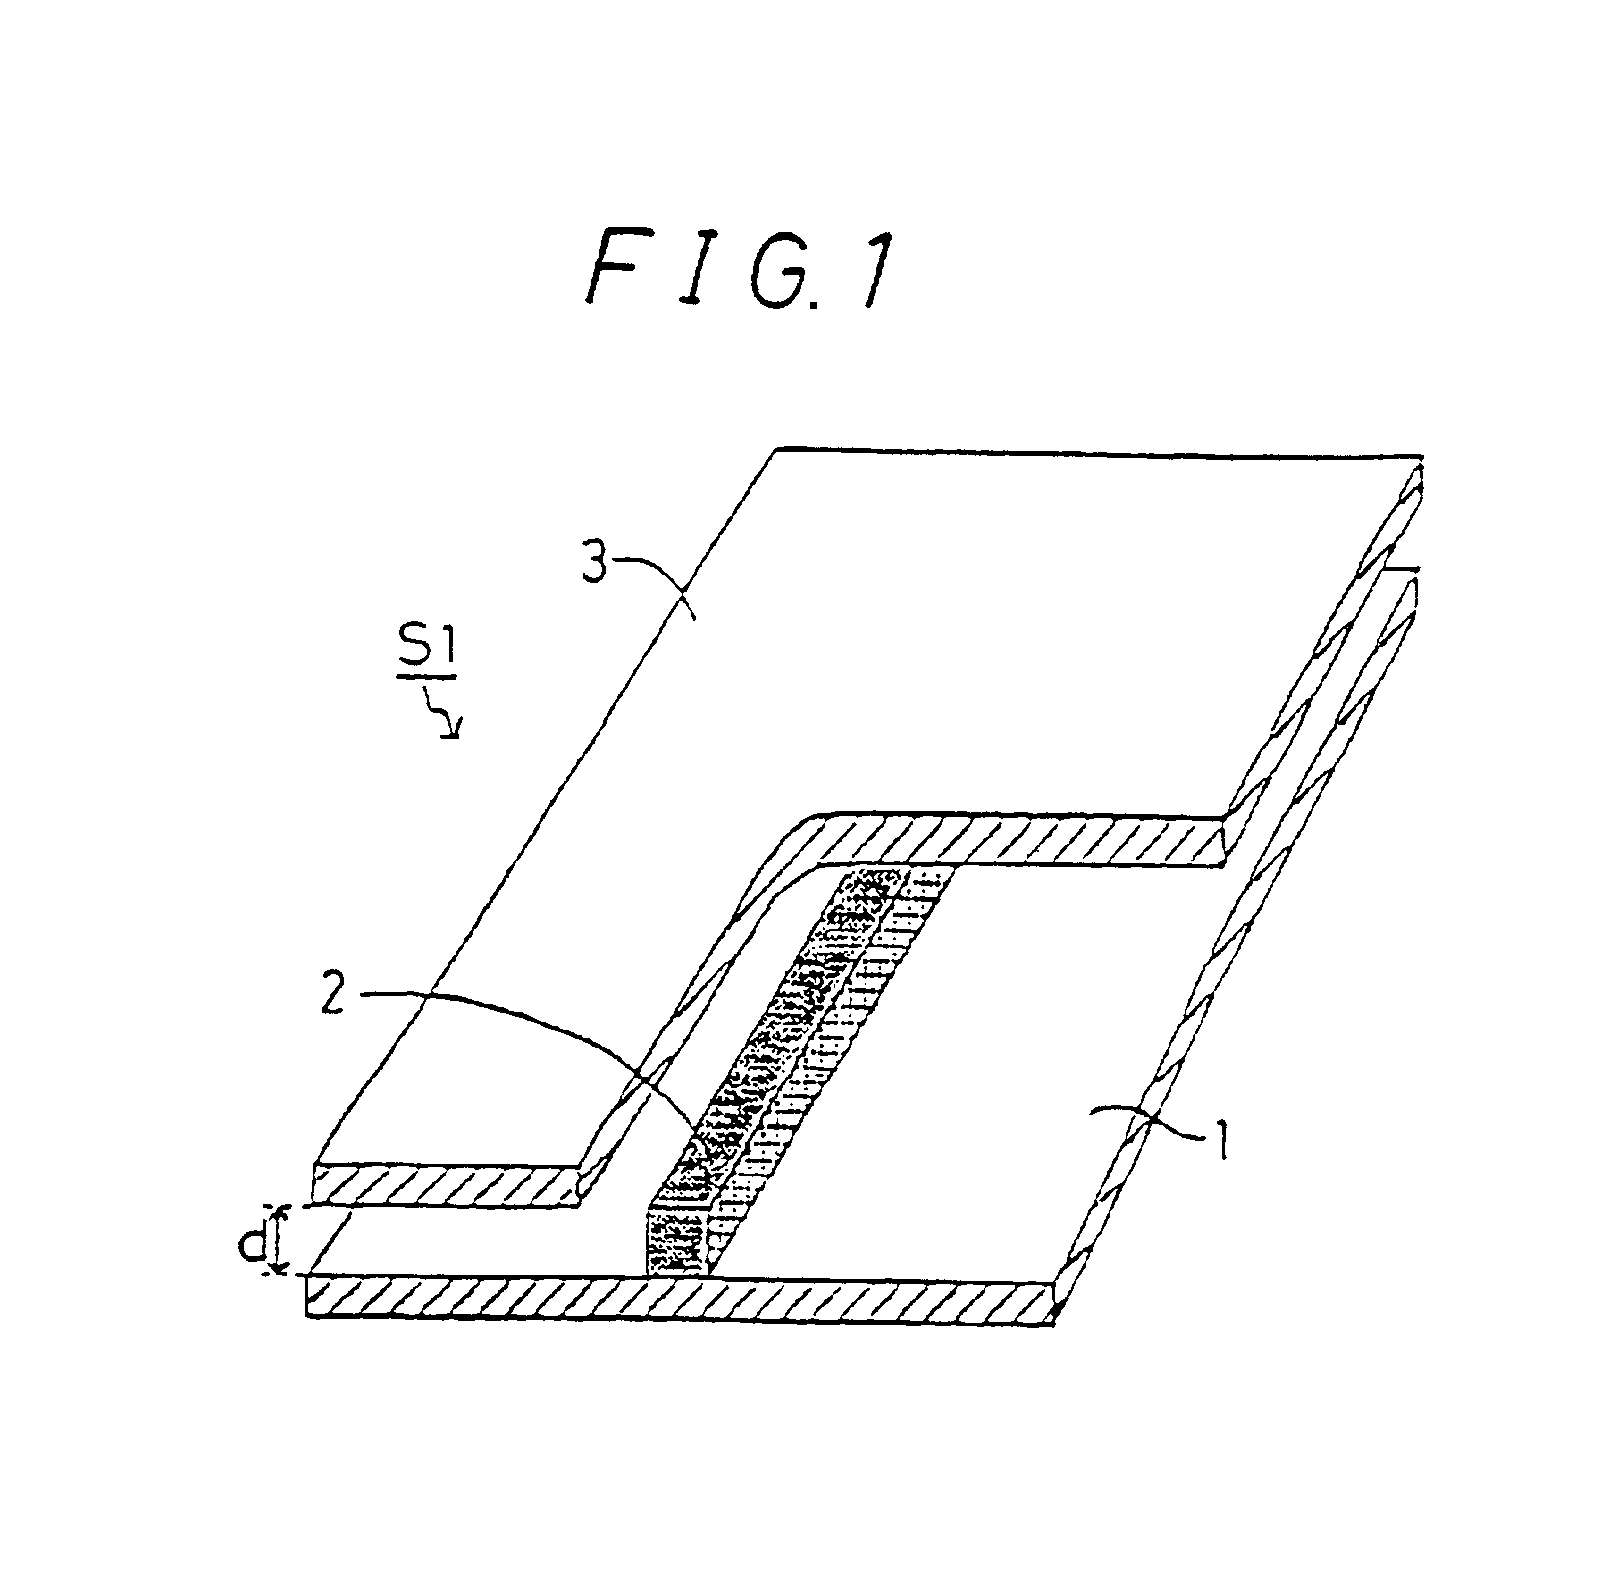 Non-radiative dielectric waveguide and millimeter wave transmitting/receiving apparatus